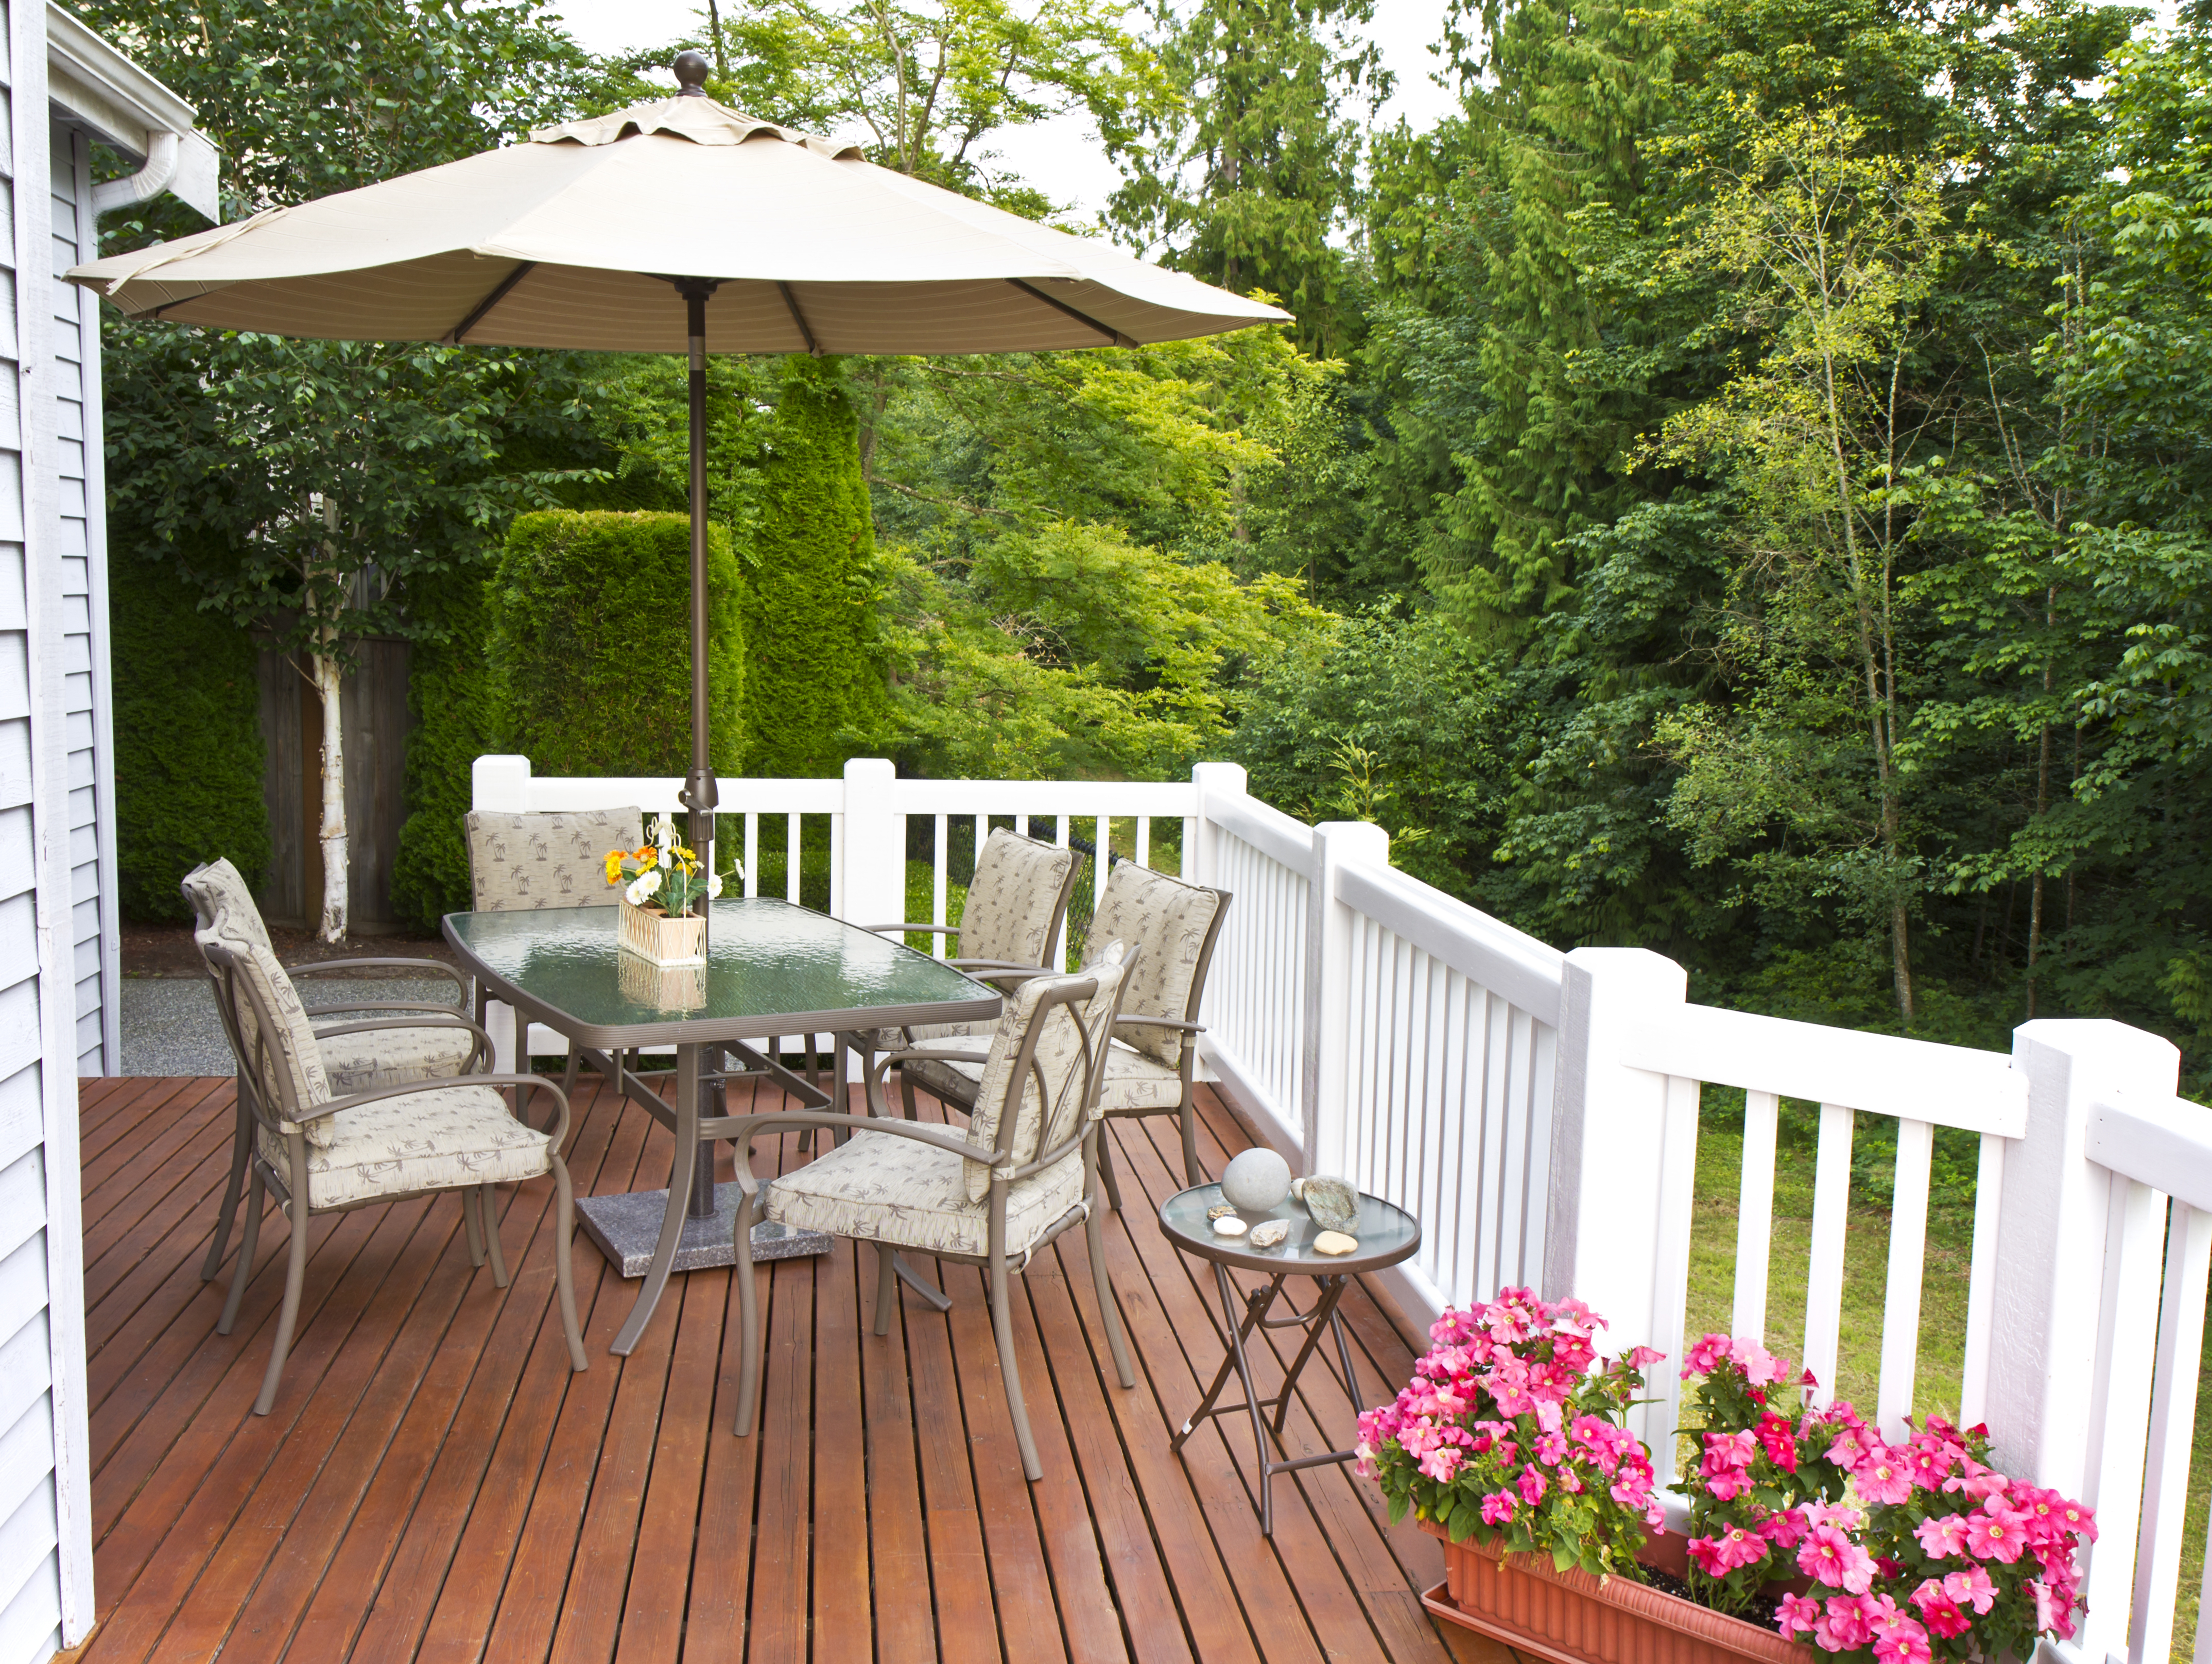 A patio on a wooden deck with trees in the background. | Source: Shutterstock